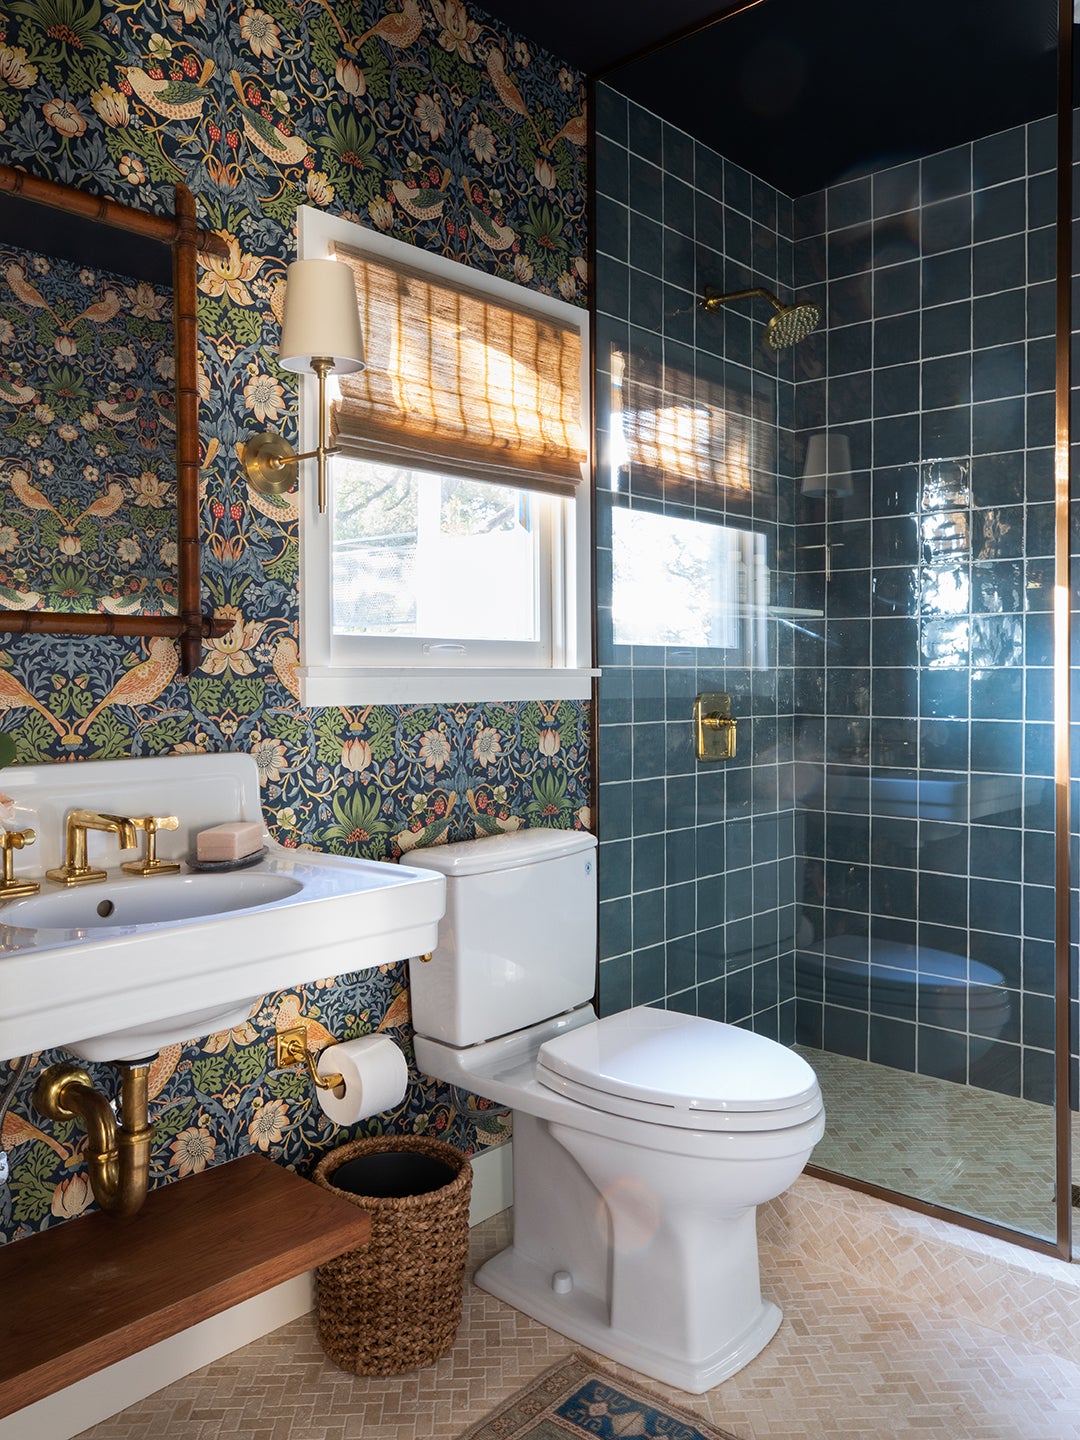 After Image of Bathroom with blue tile and Morris & Co wallpaper